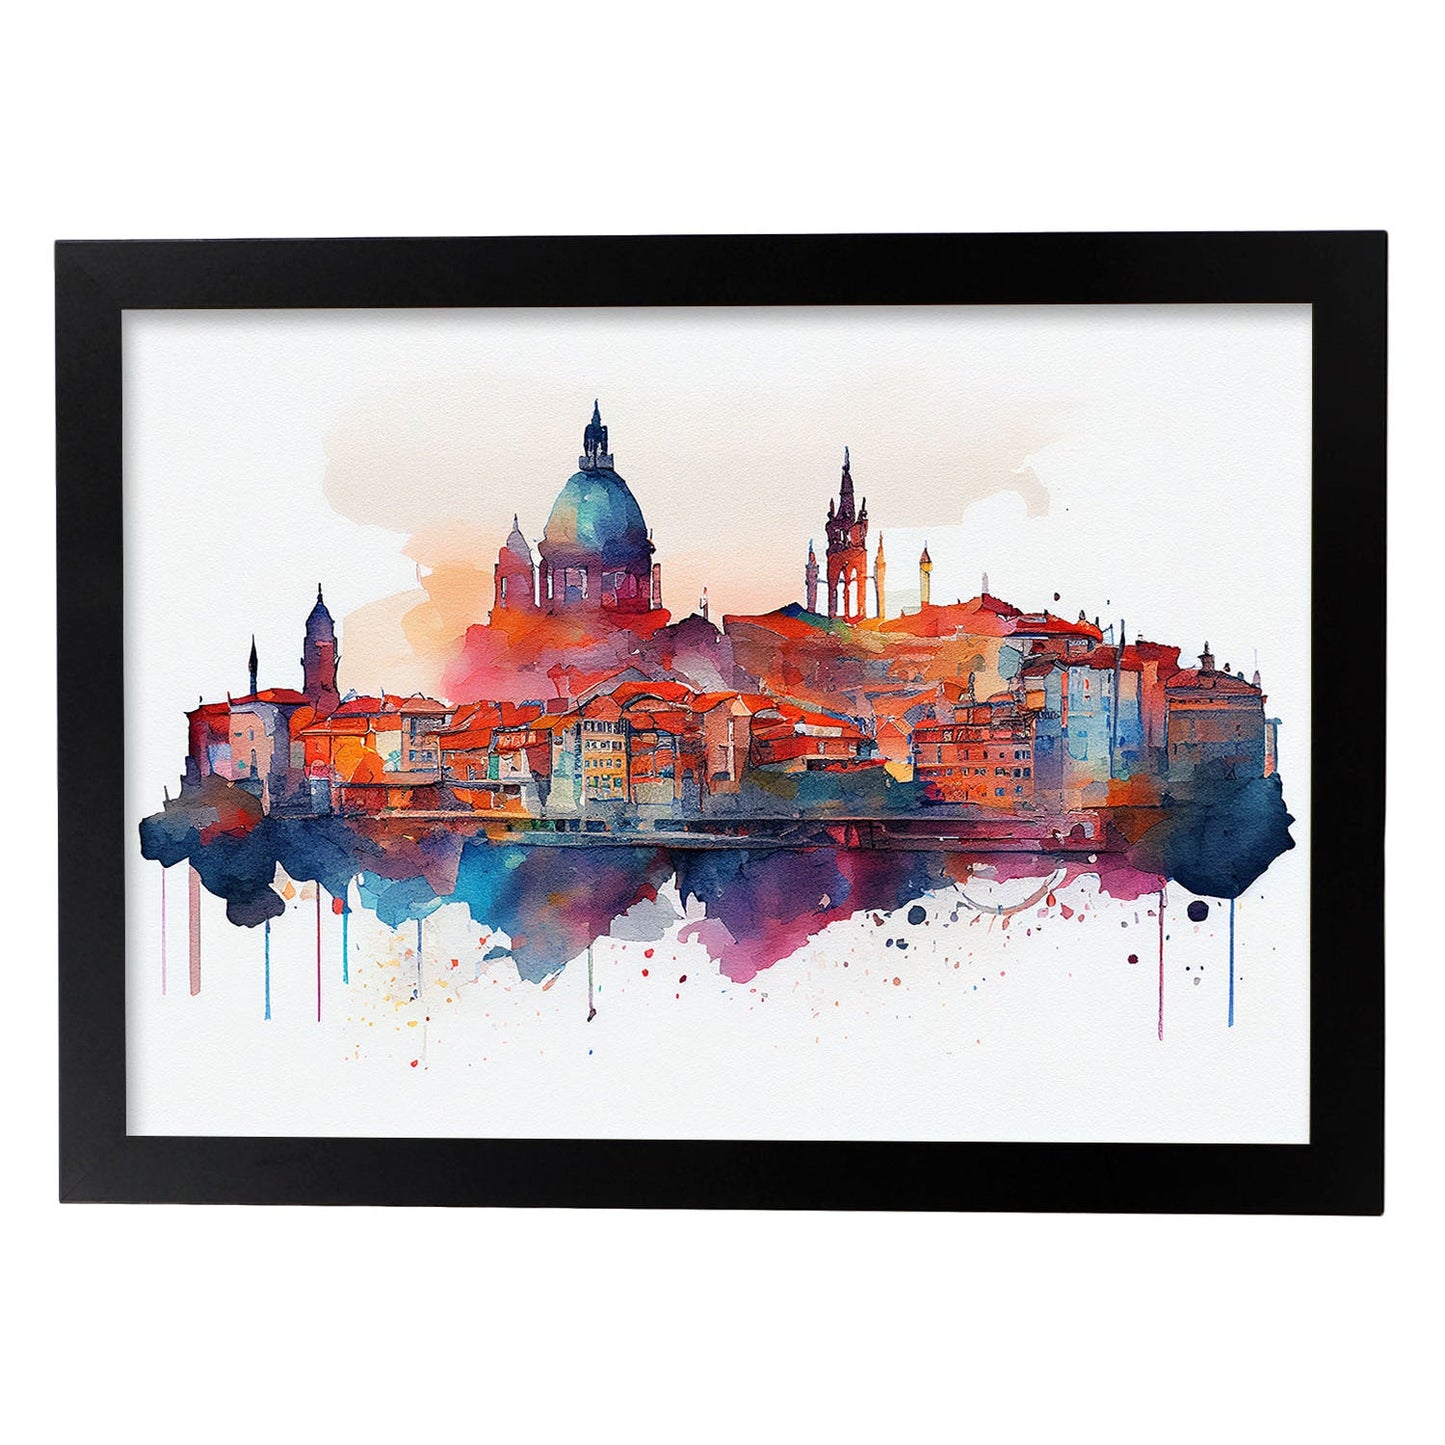 Nacnic watercolor of a skyline of the city of Porto. Aesthetic Wall Art Prints for Bedroom or Living Room Design.